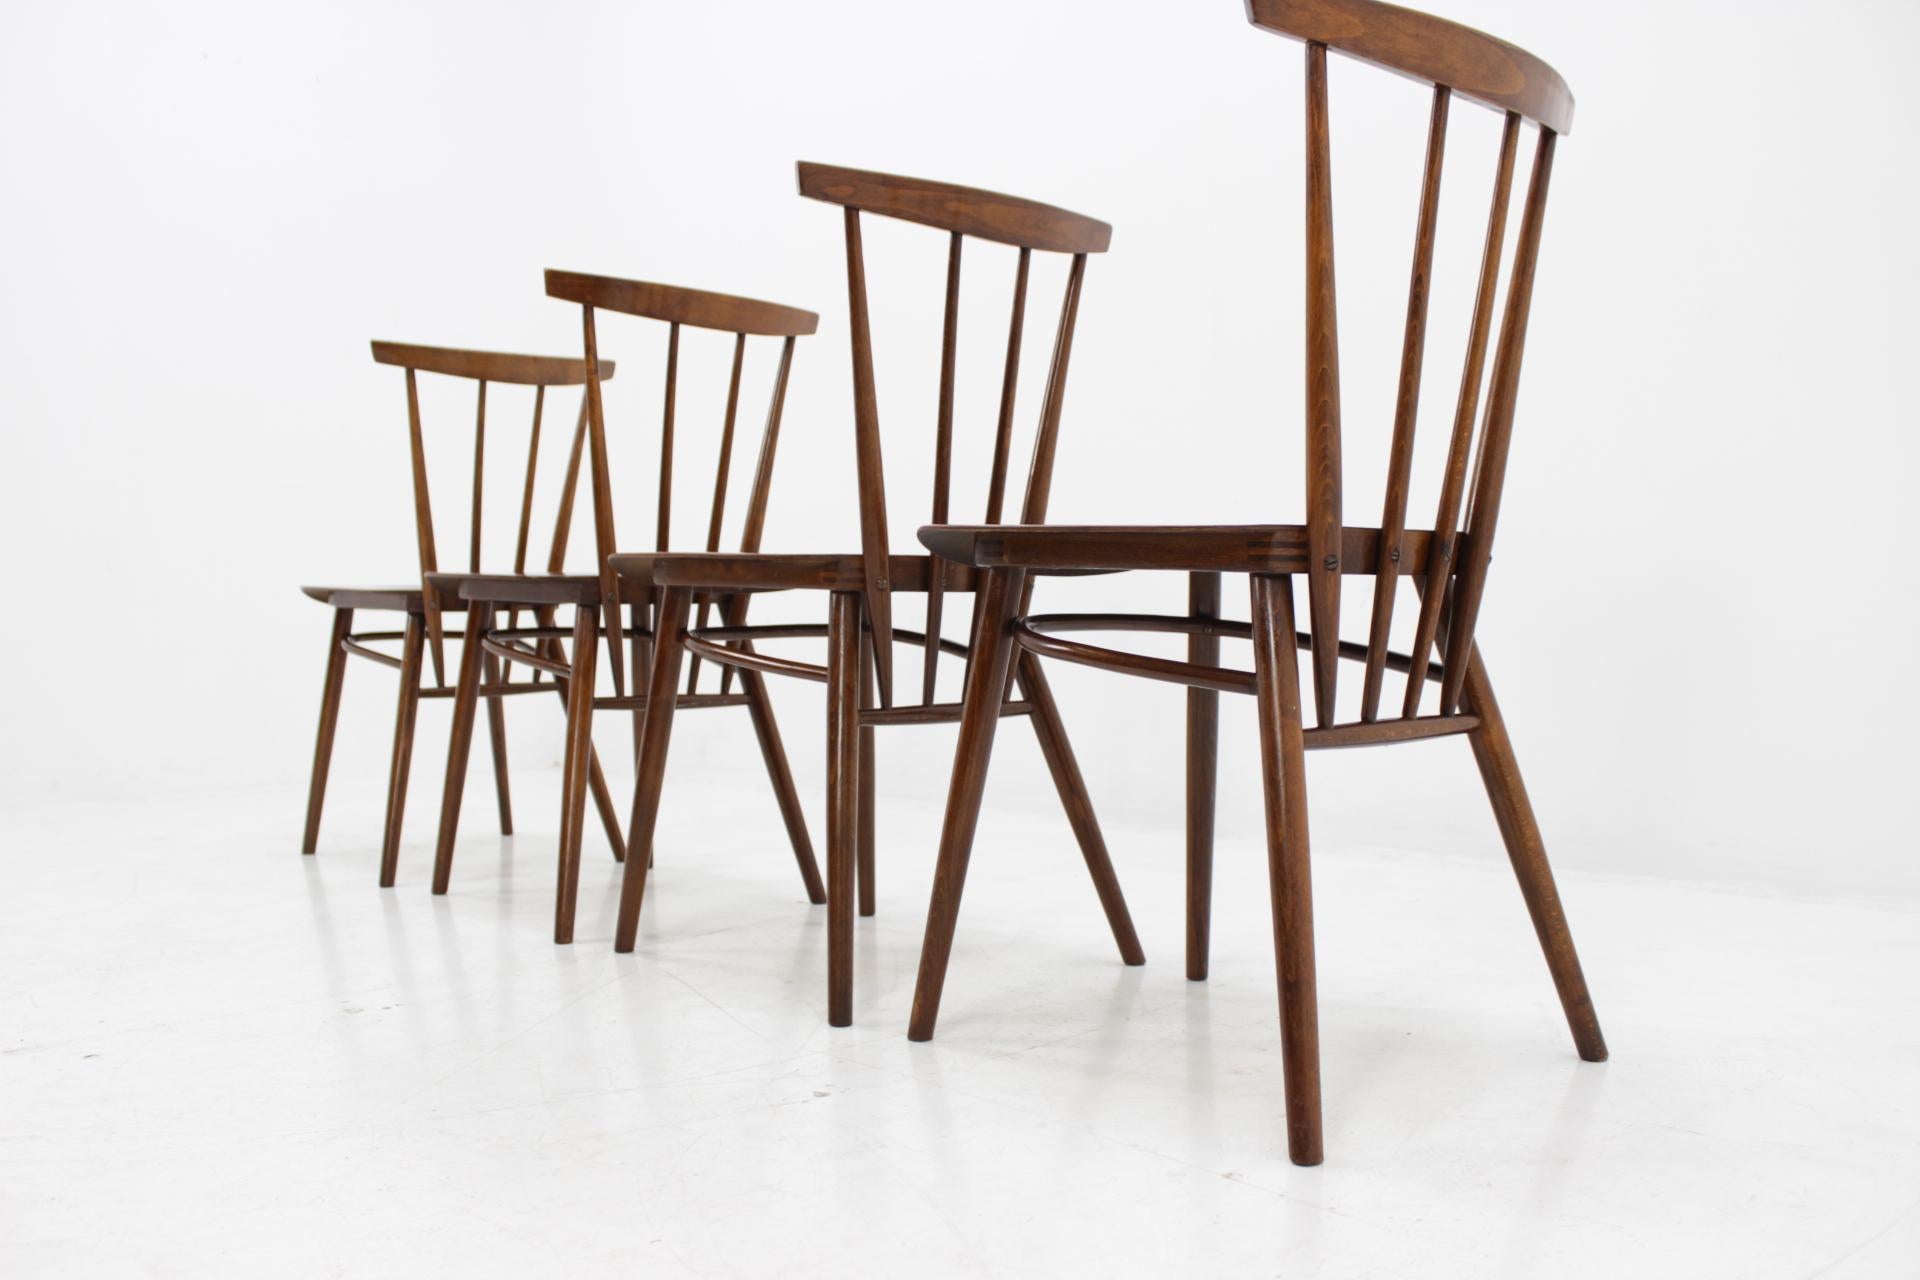 Mid-20th Century Set of Four Tatra Dining Chairs, Czechoslovakia, 1960 For Sale